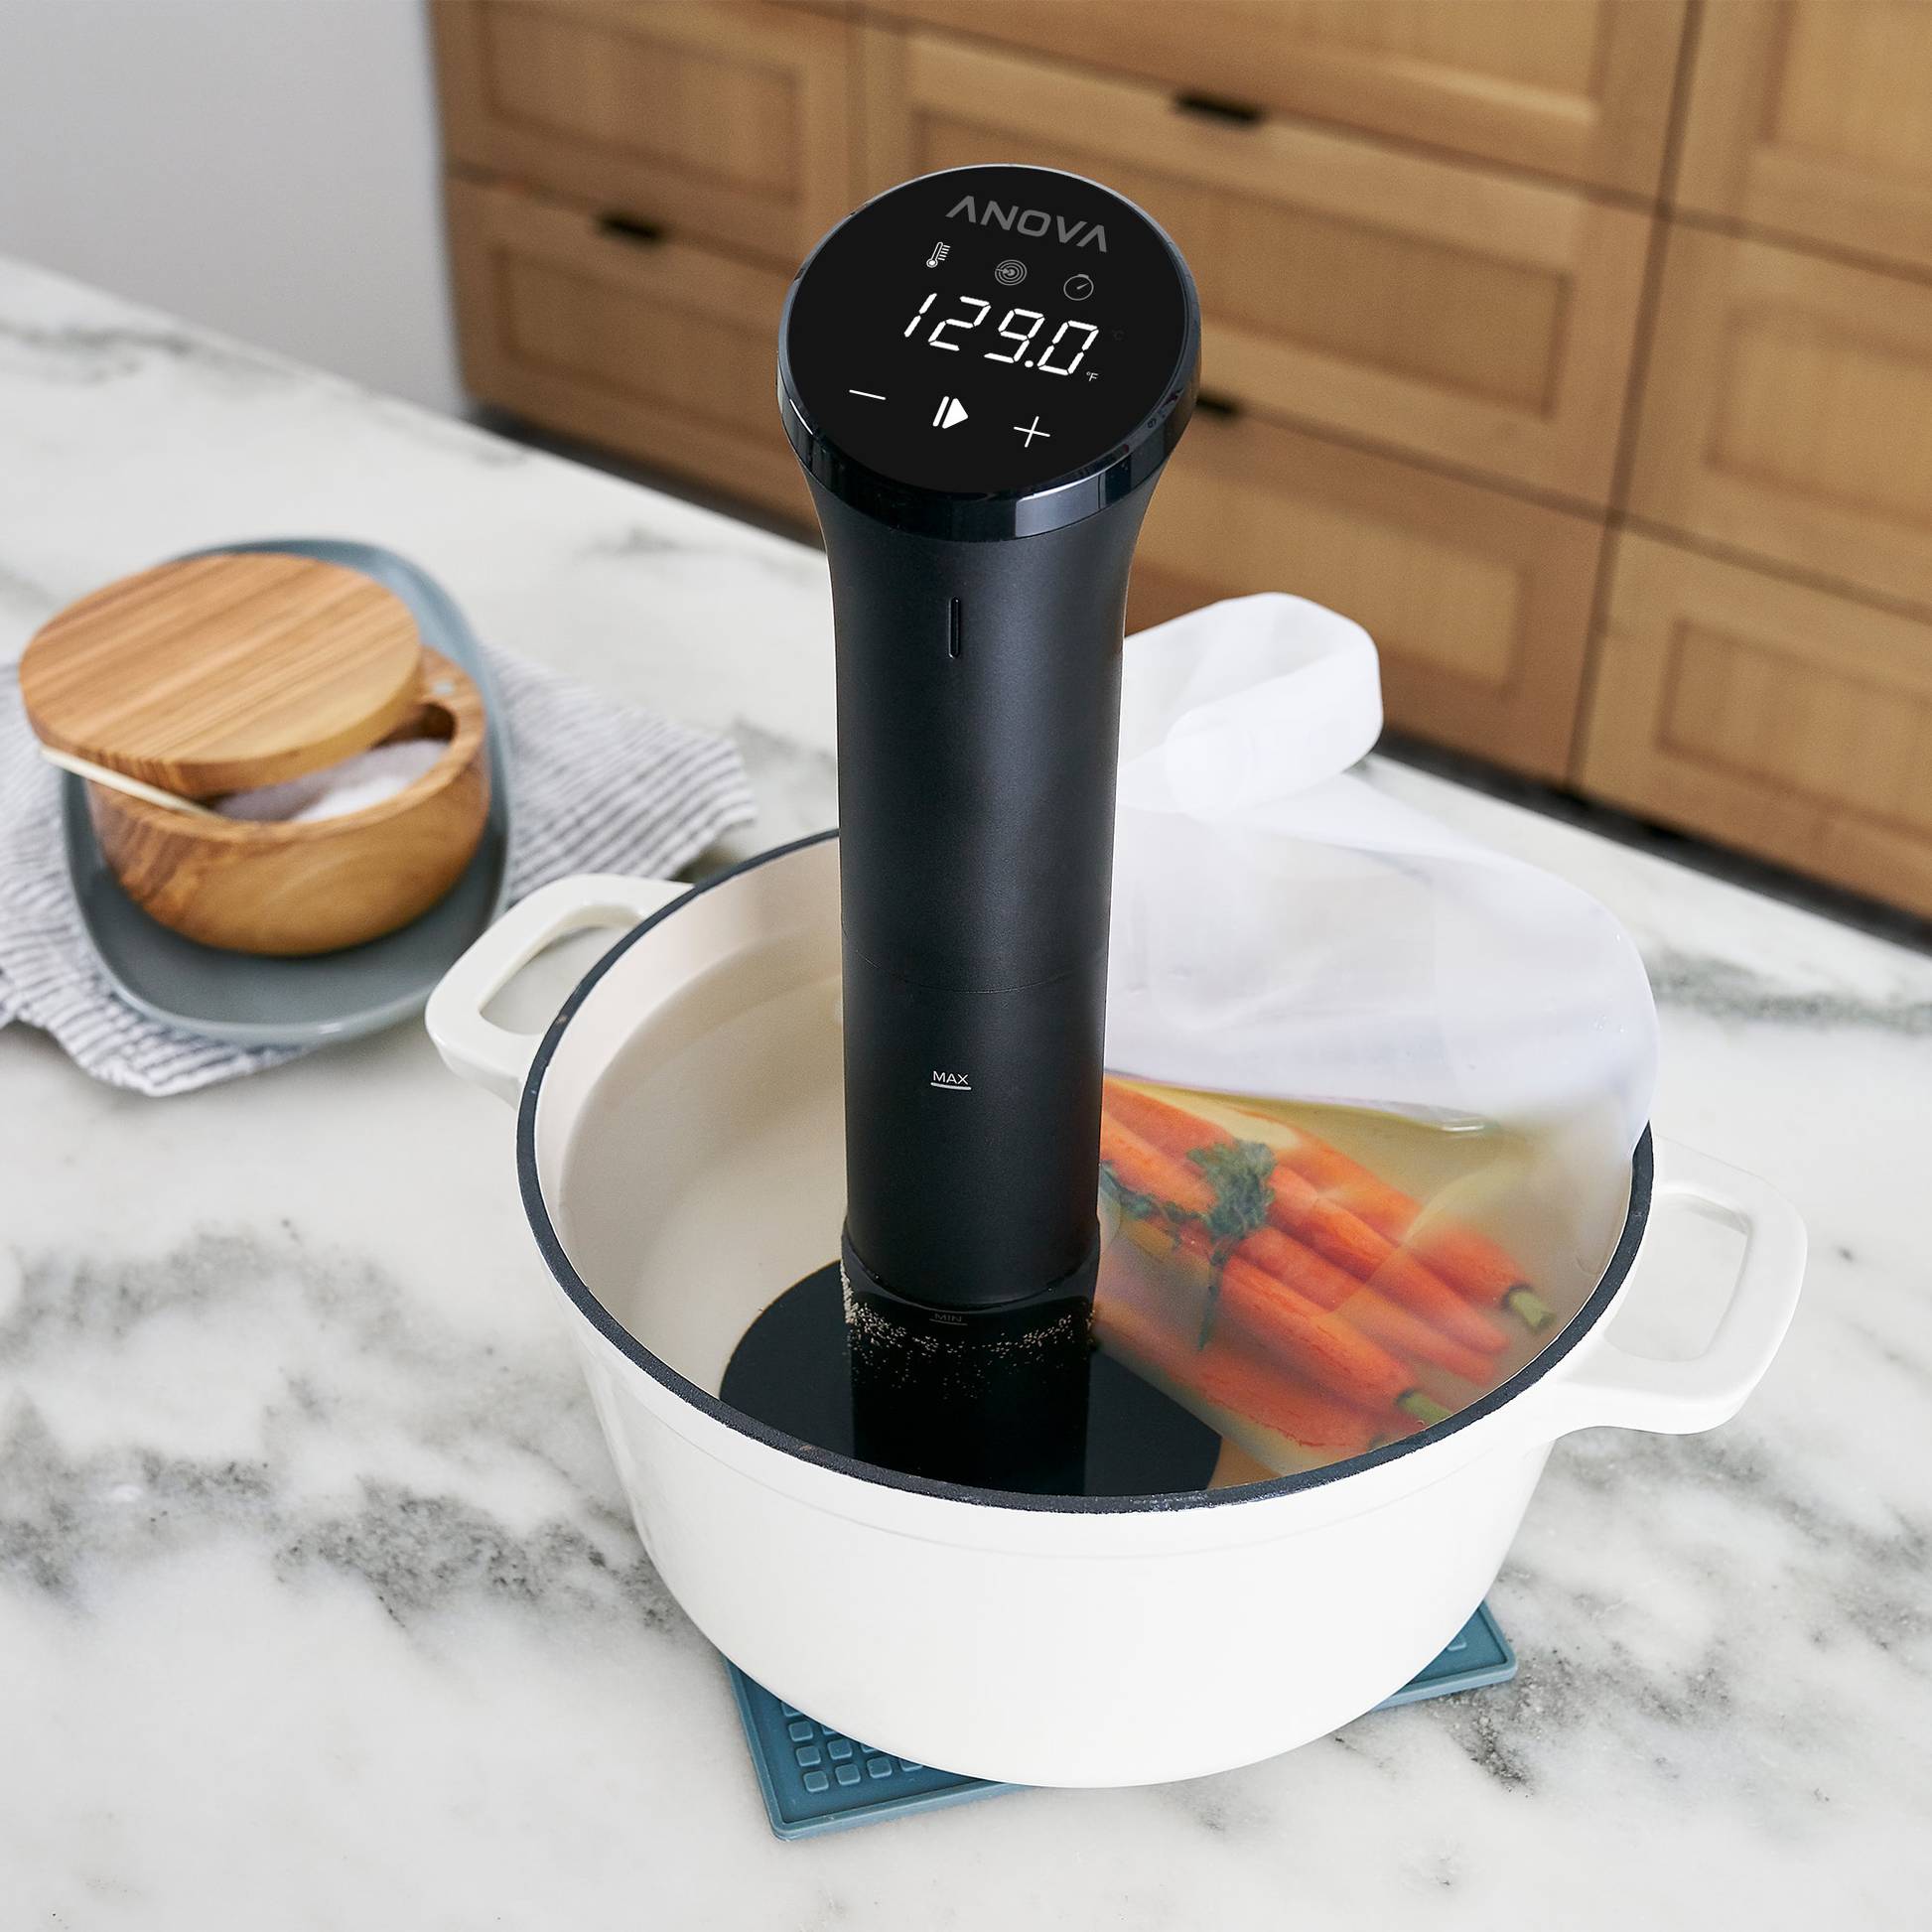 Greater Goods Precision Cooker Review